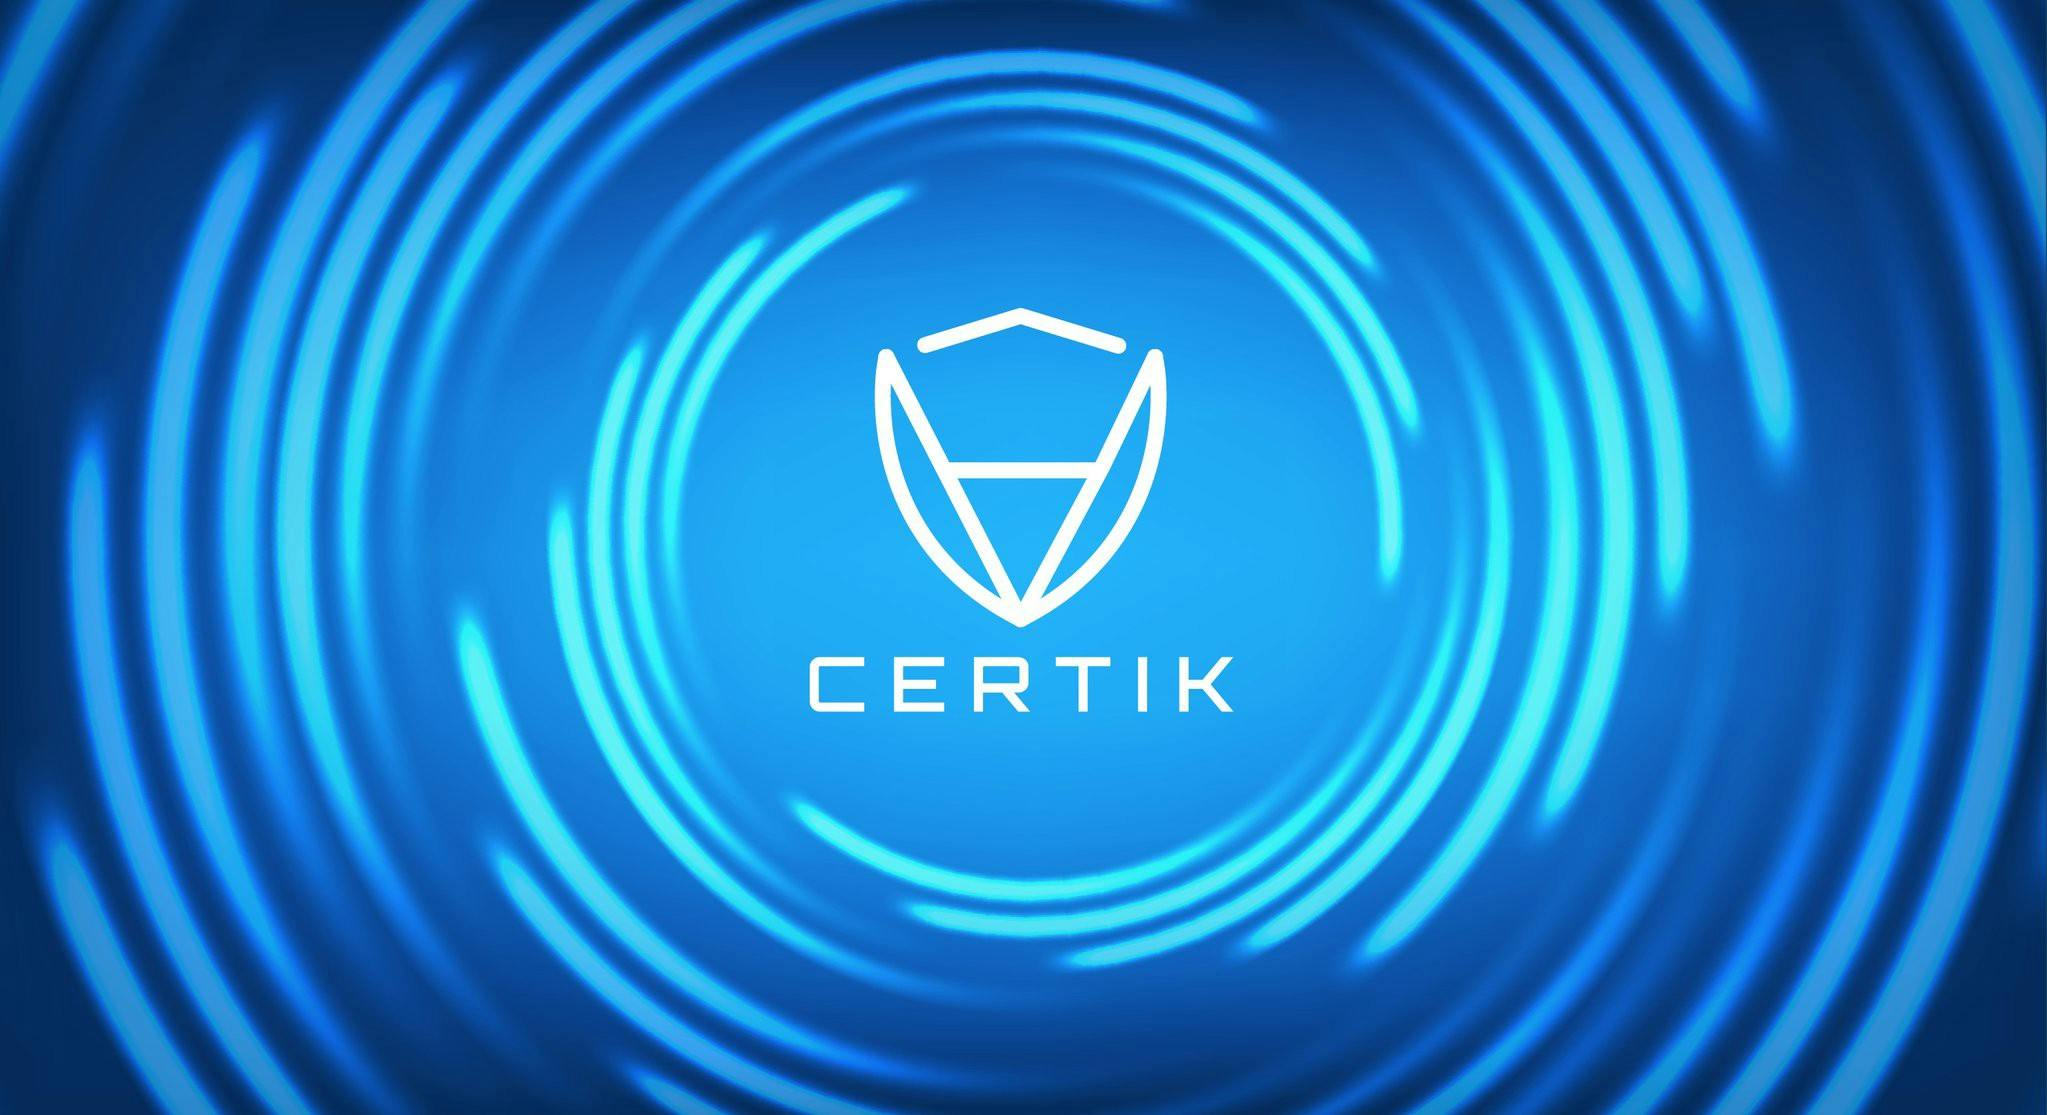 CertiK AutoScan Engine: 53 of the top 500 tokens by market cap were found to have vulnerabilities